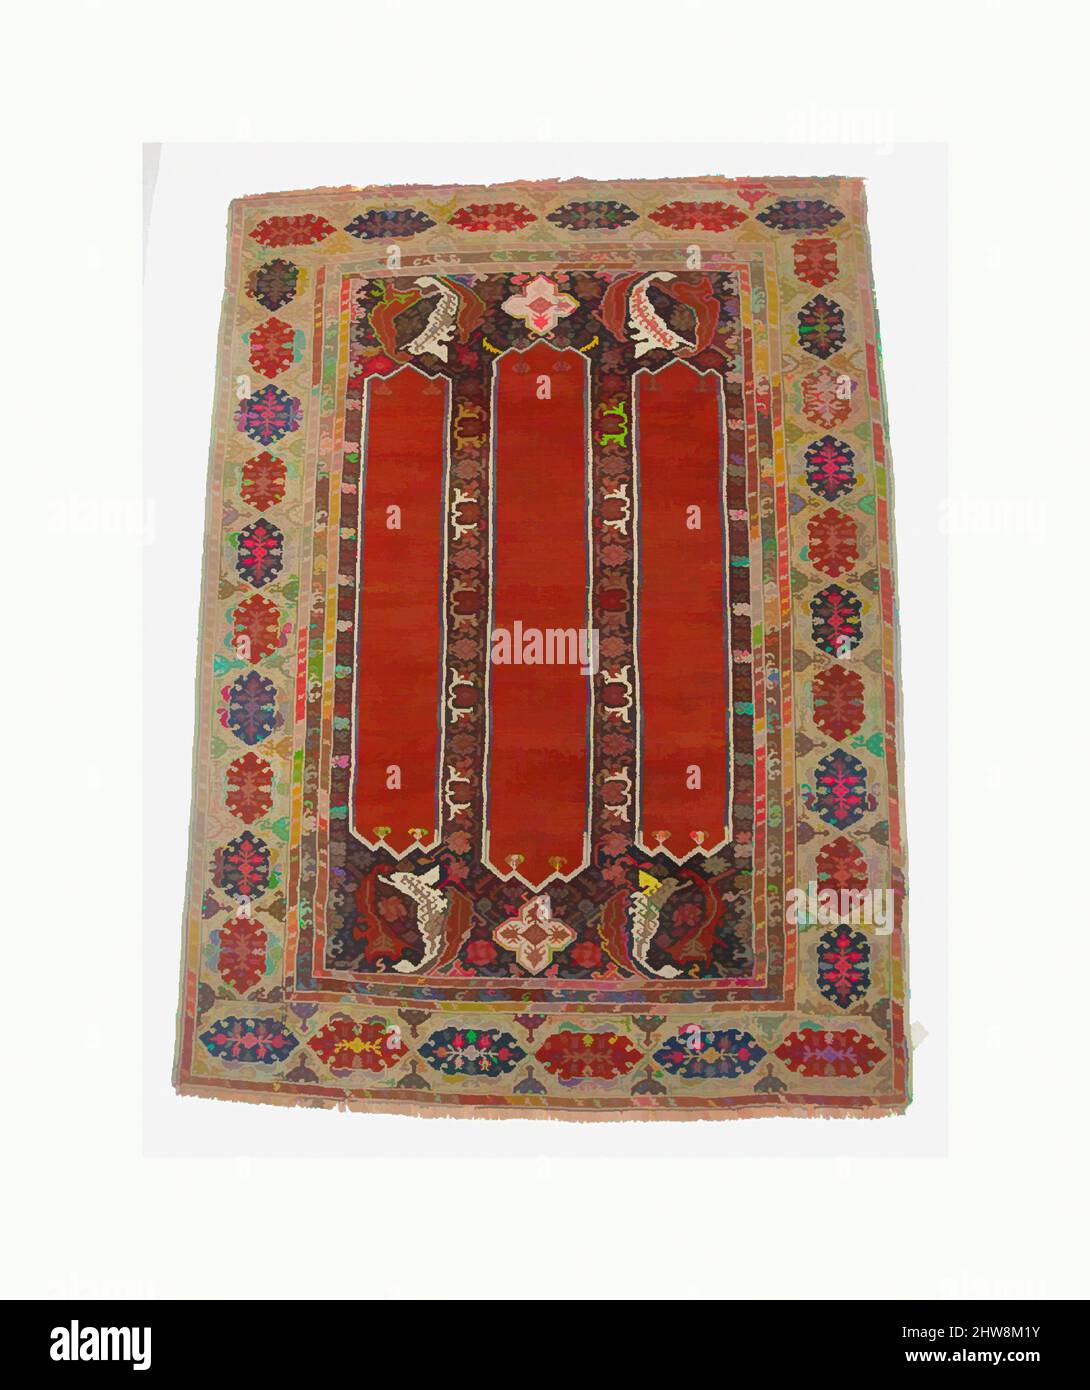 Art inspired by Double-Ended Two-Column Carpet, probably 18th century, Attributed to West-central Turkey, Wool (warp, weft and pile); symmetrically knotted pile, H. 75 in. (190.5 cm), Textiles-Rugs, Classic works modernized by Artotop with a splash of modernity. Shapes, color and value, eye-catching visual impact on art. Emotions through freedom of artworks in a contemporary way. A timeless message pursuing a wildly creative new direction. Artists turning to the digital medium and creating the Artotop NFT Stock Photo